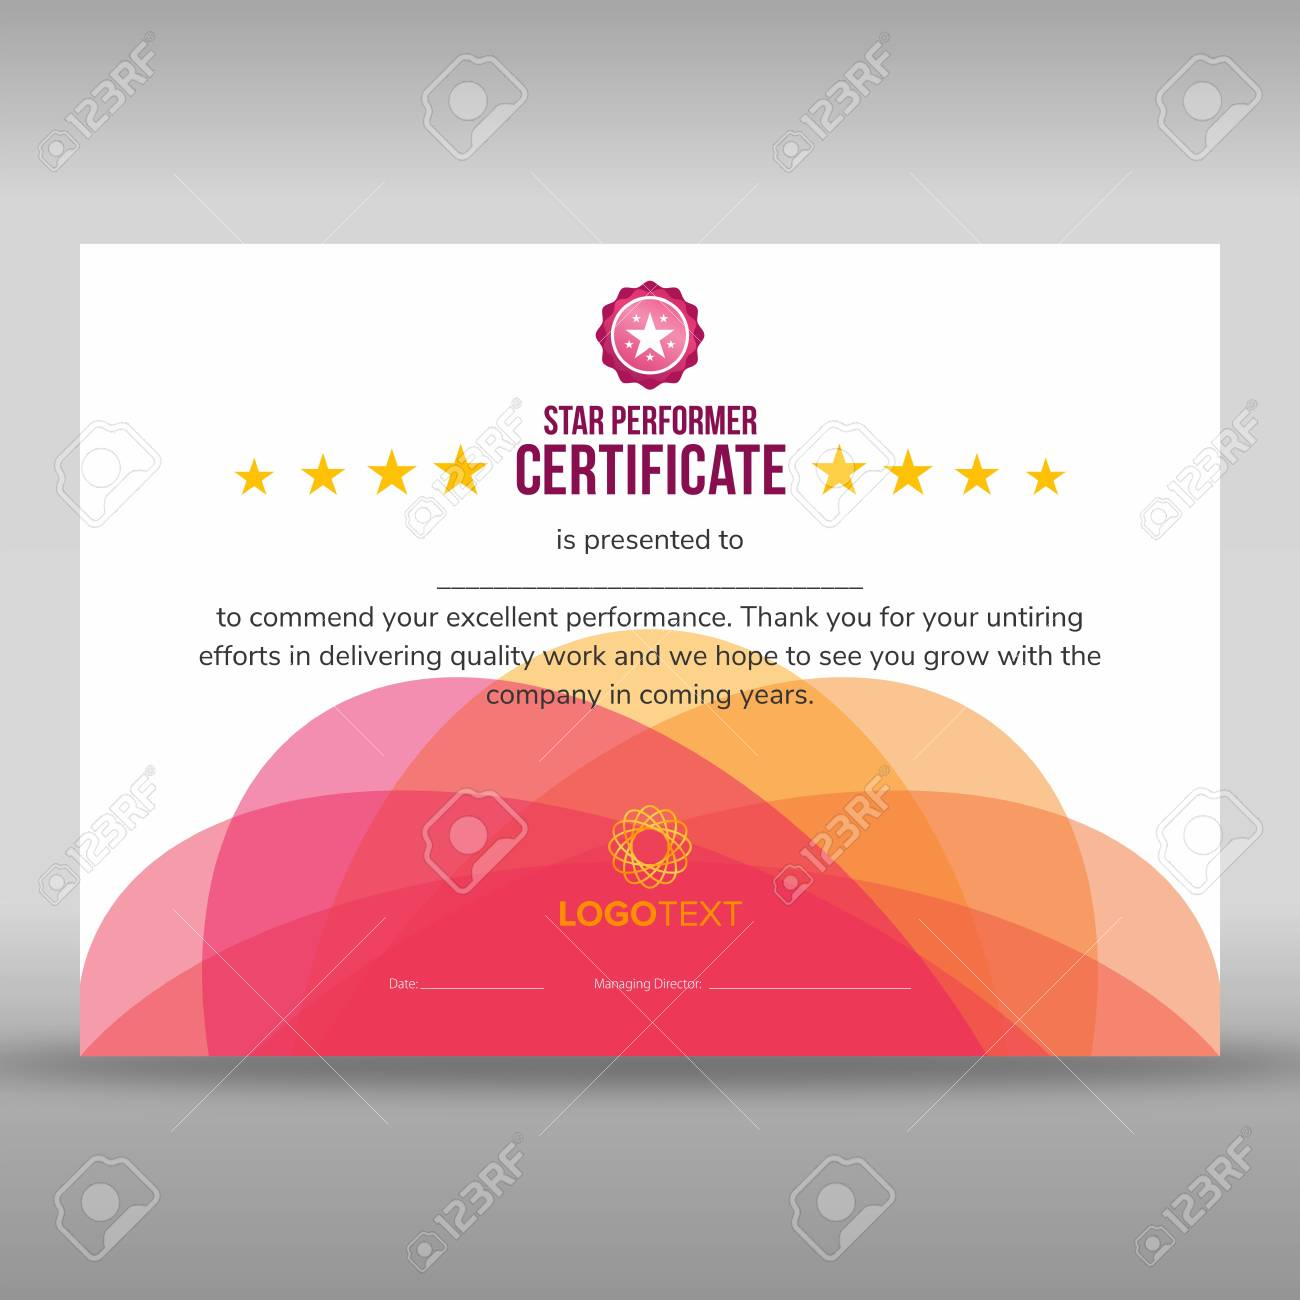 Abstract Creative Pink Star Performer Certificate Royalty Free SVG  Regarding Star Performer Certificate Templates